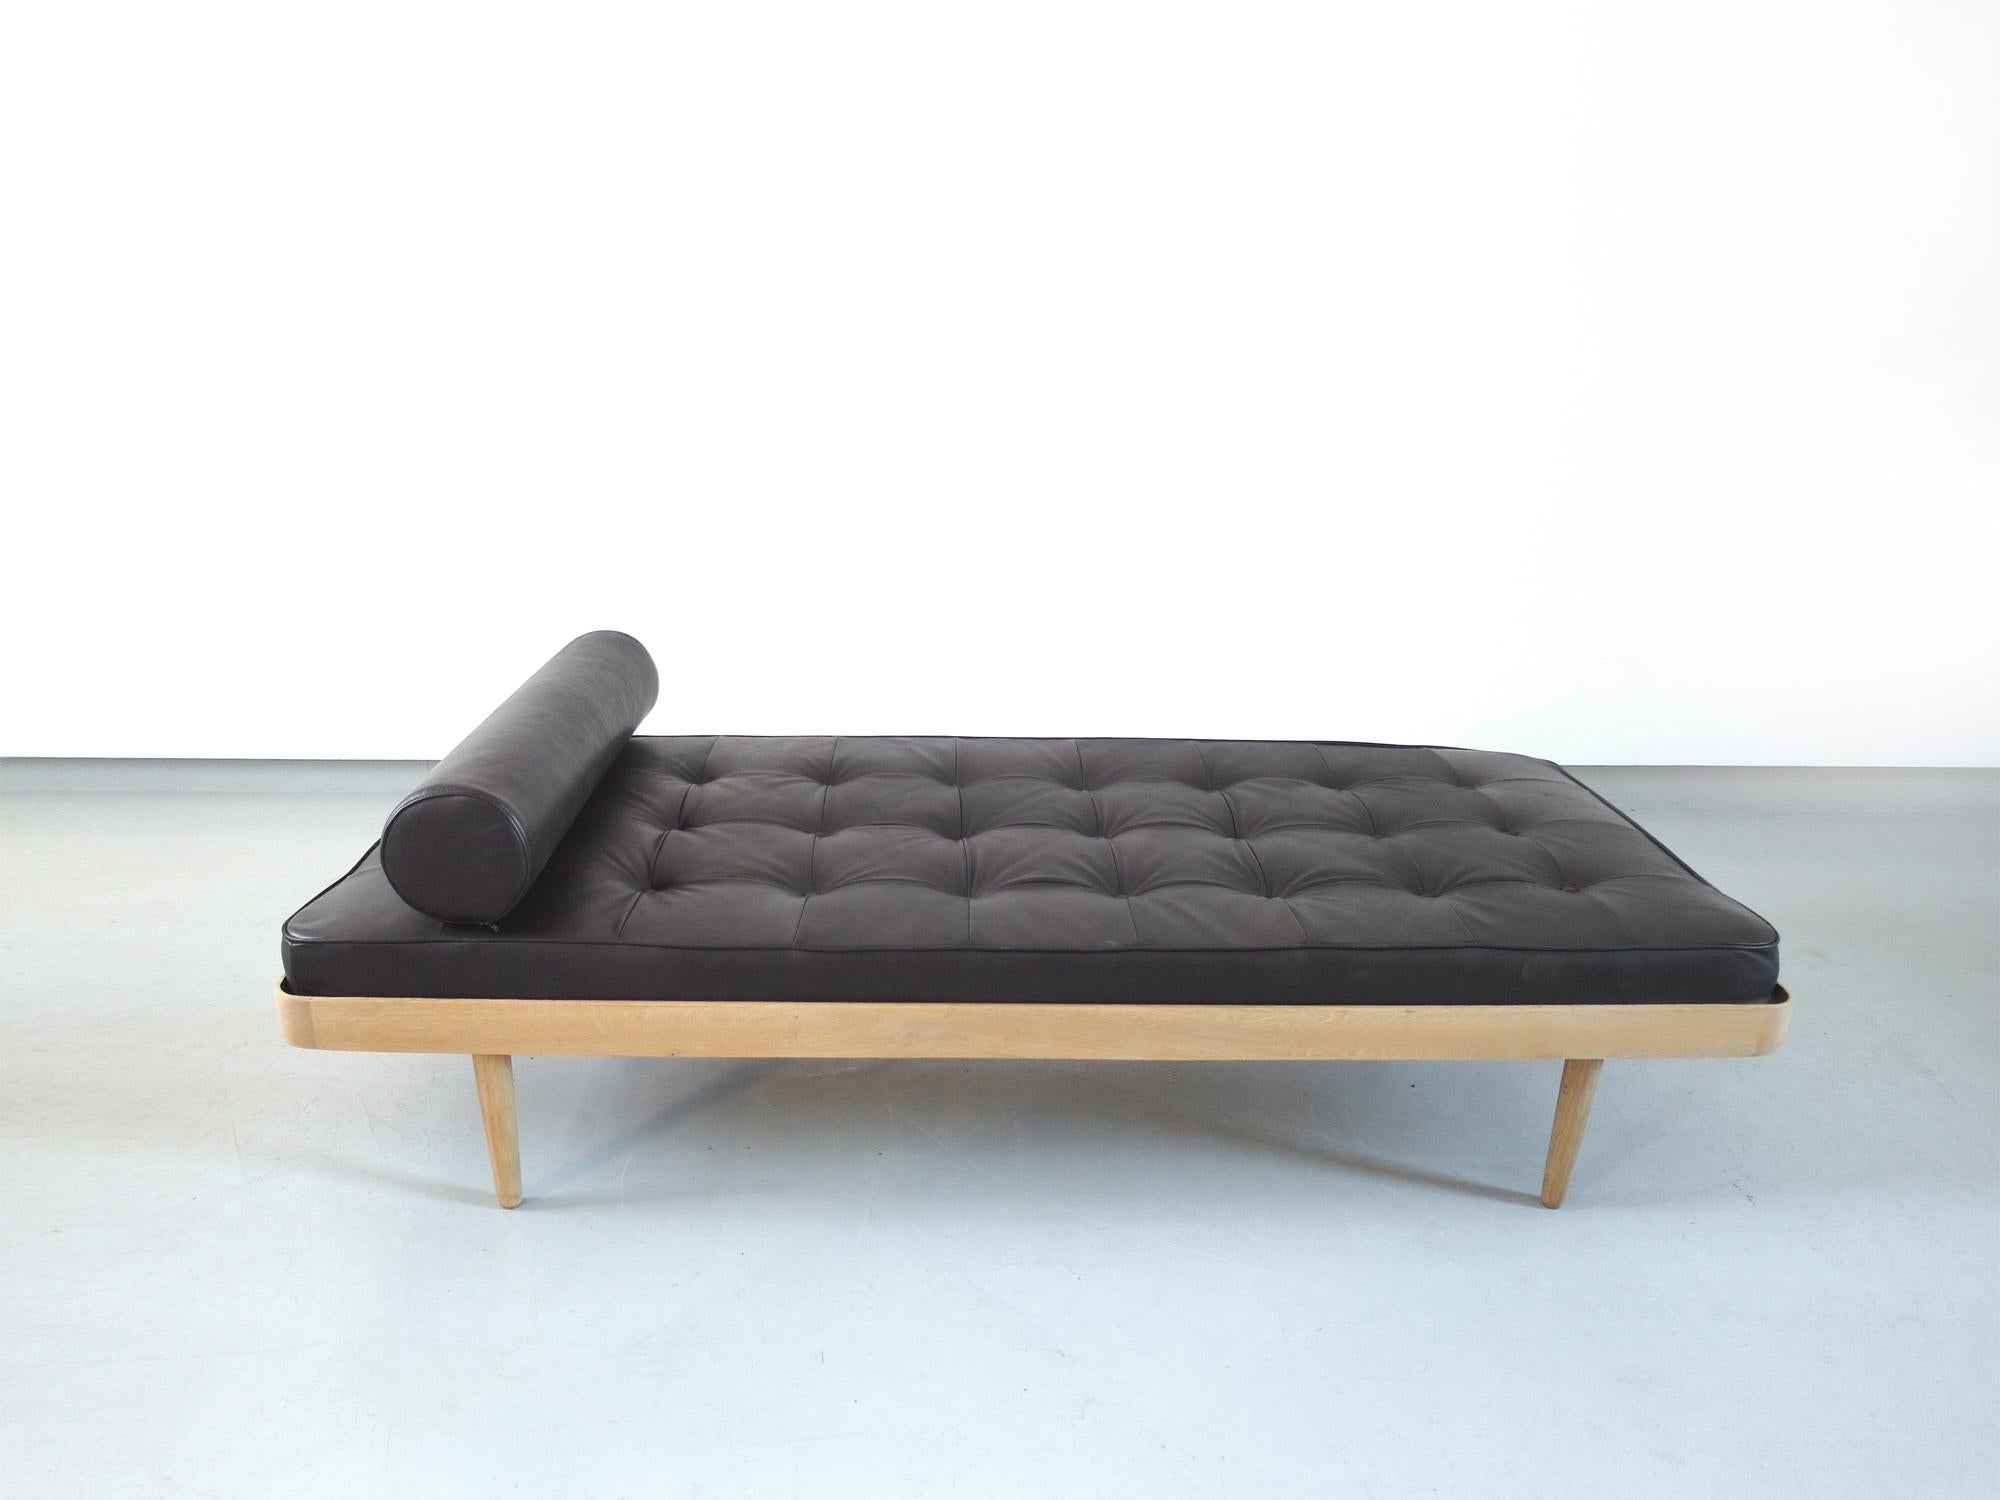 Sophisticated daybed by Danish manufacturer Horsnaes Møbler made in solid oakwood, Denmark, circa 1956. This daybed shows a beautiful contrast in materials. The skilfully made oakwood frame features rounded corners and solid teak tapering legs. The